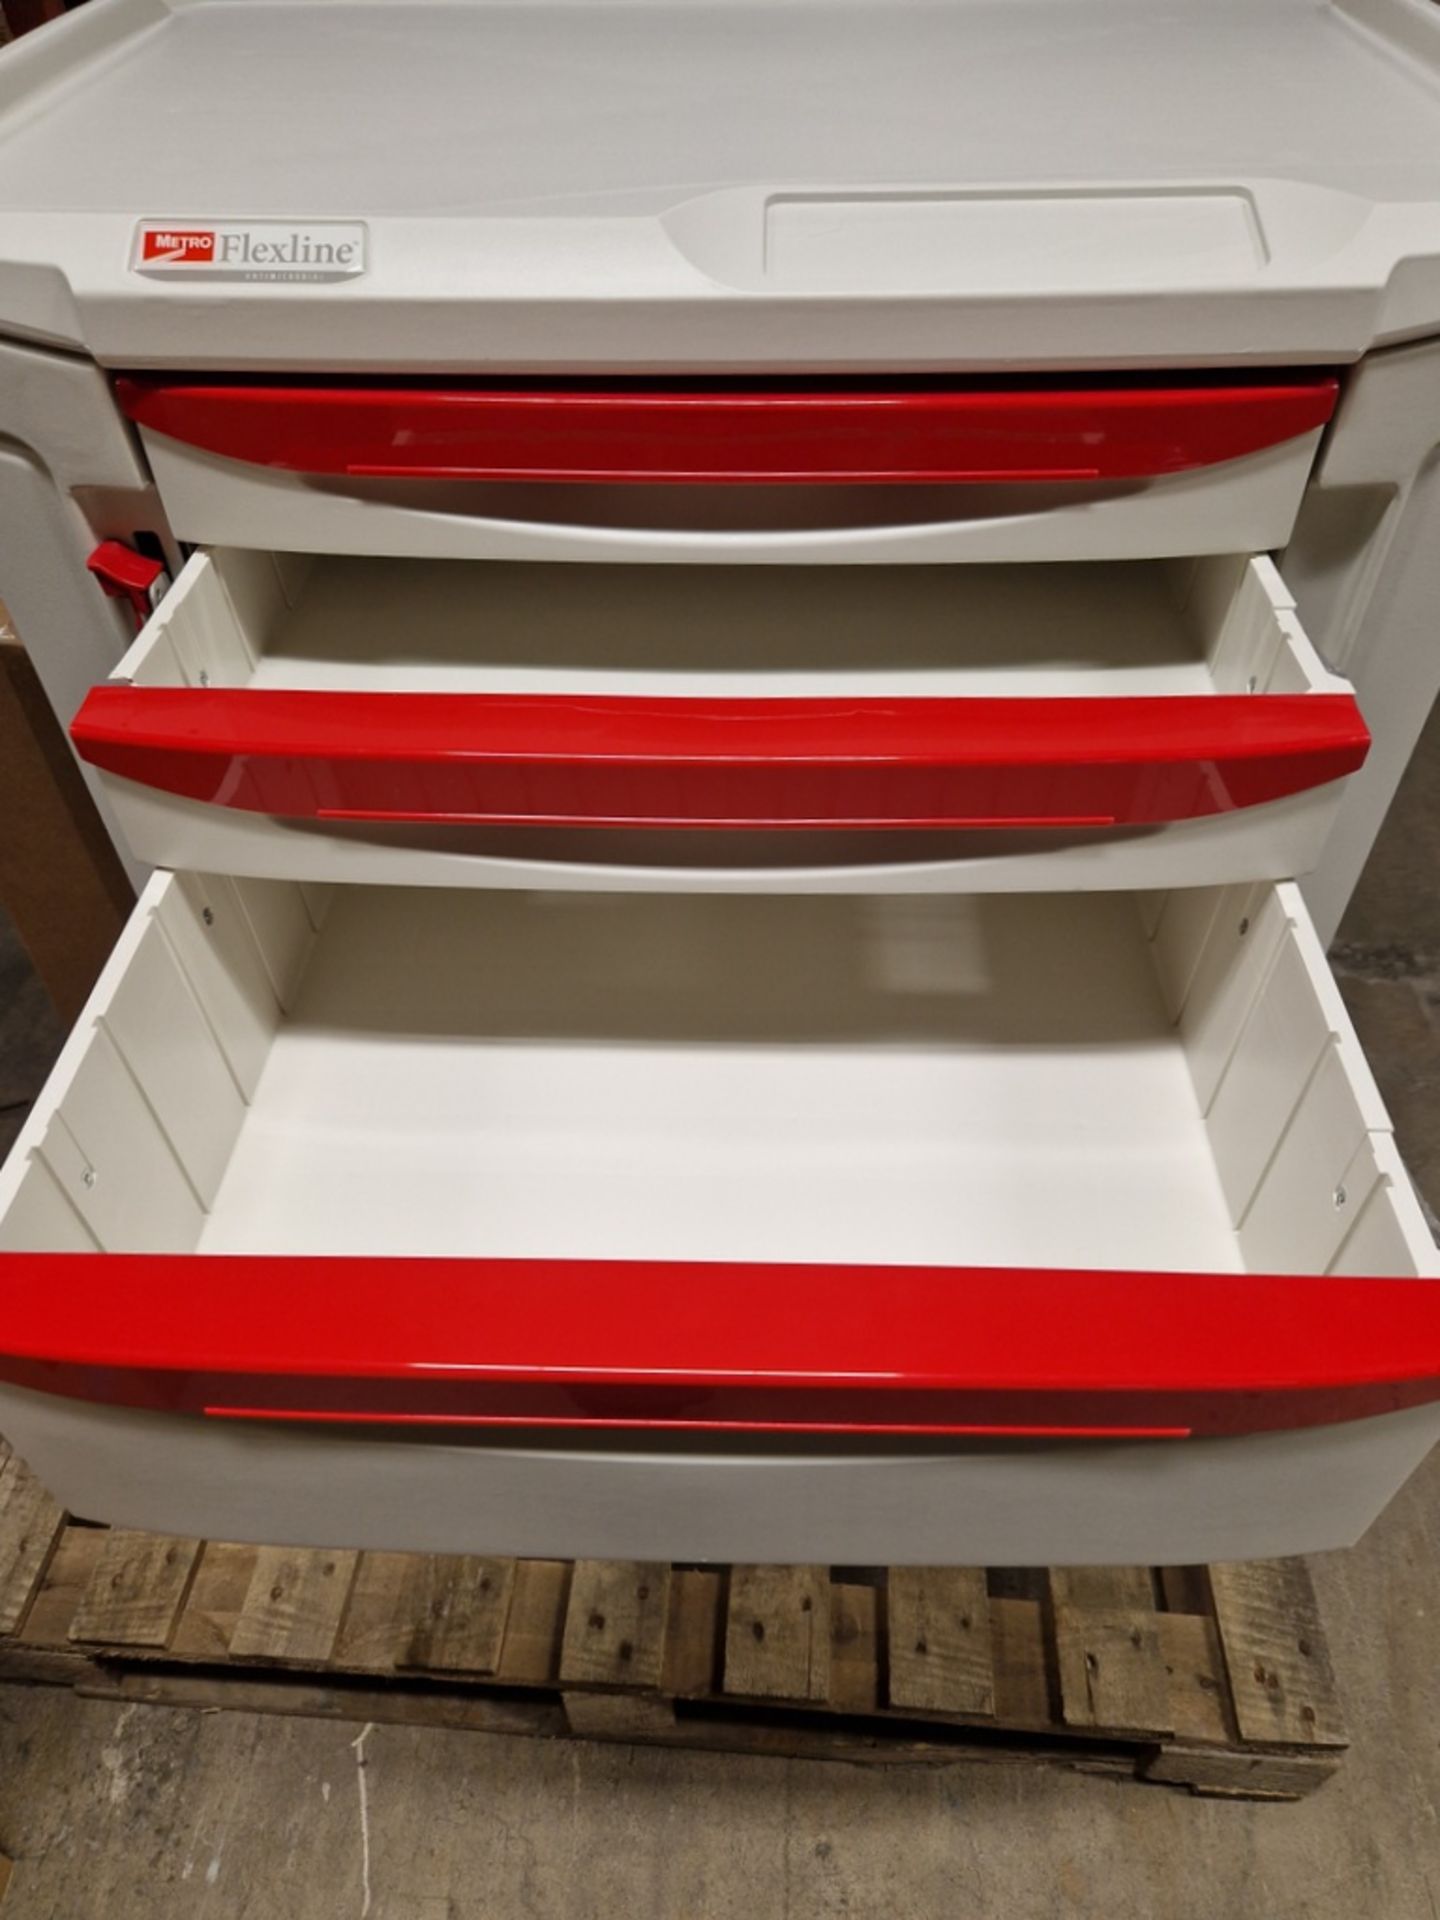 48x Metro Flexline FL27P portable medical storage cart complete with accessories - Image 6 of 13